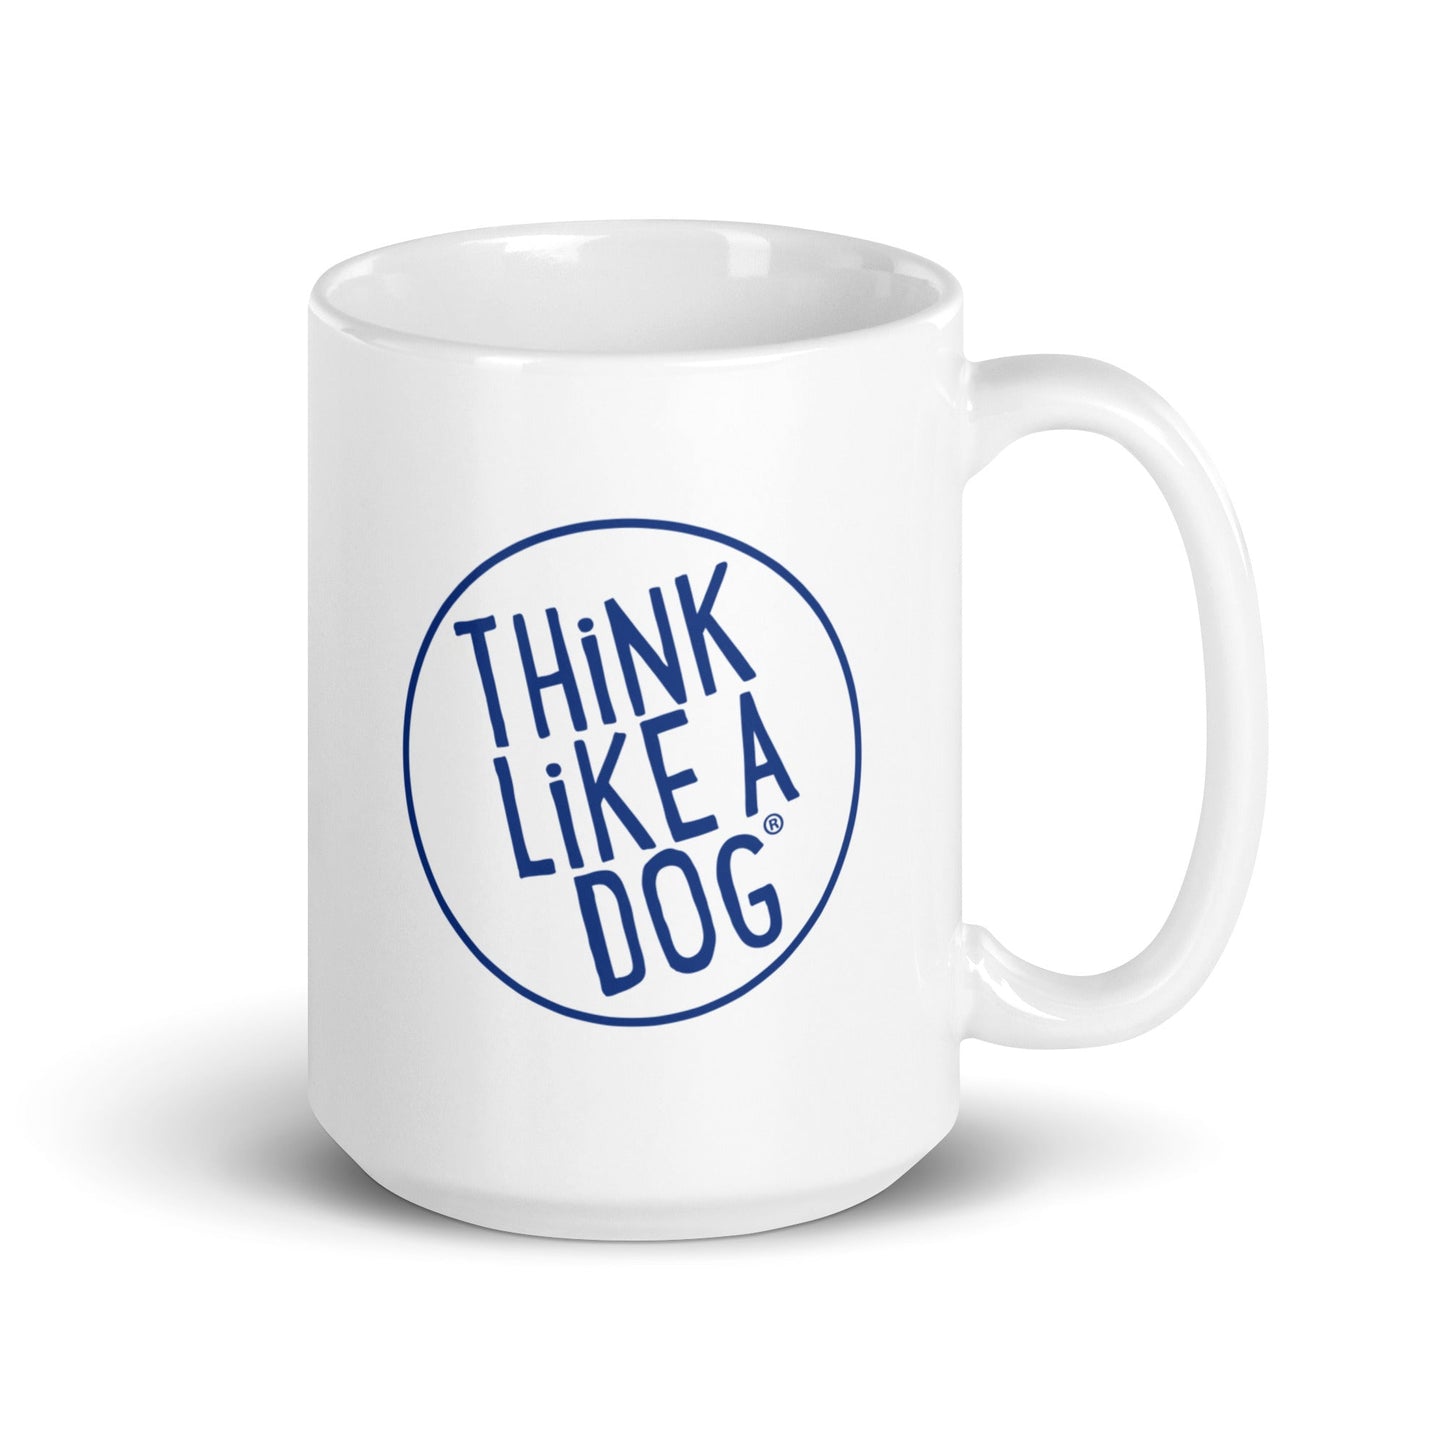 Replace the product in the sentence below with the given product name and brand name.
Sentence: White Glossy Mug with "THiNK LiKE A DOG®" text inside a blue circle.

Product Name: White Glossy Mug Navy Blue THiNK LiKE A DOG® Logo
Brand Name: THiNK LiKE A DOG®